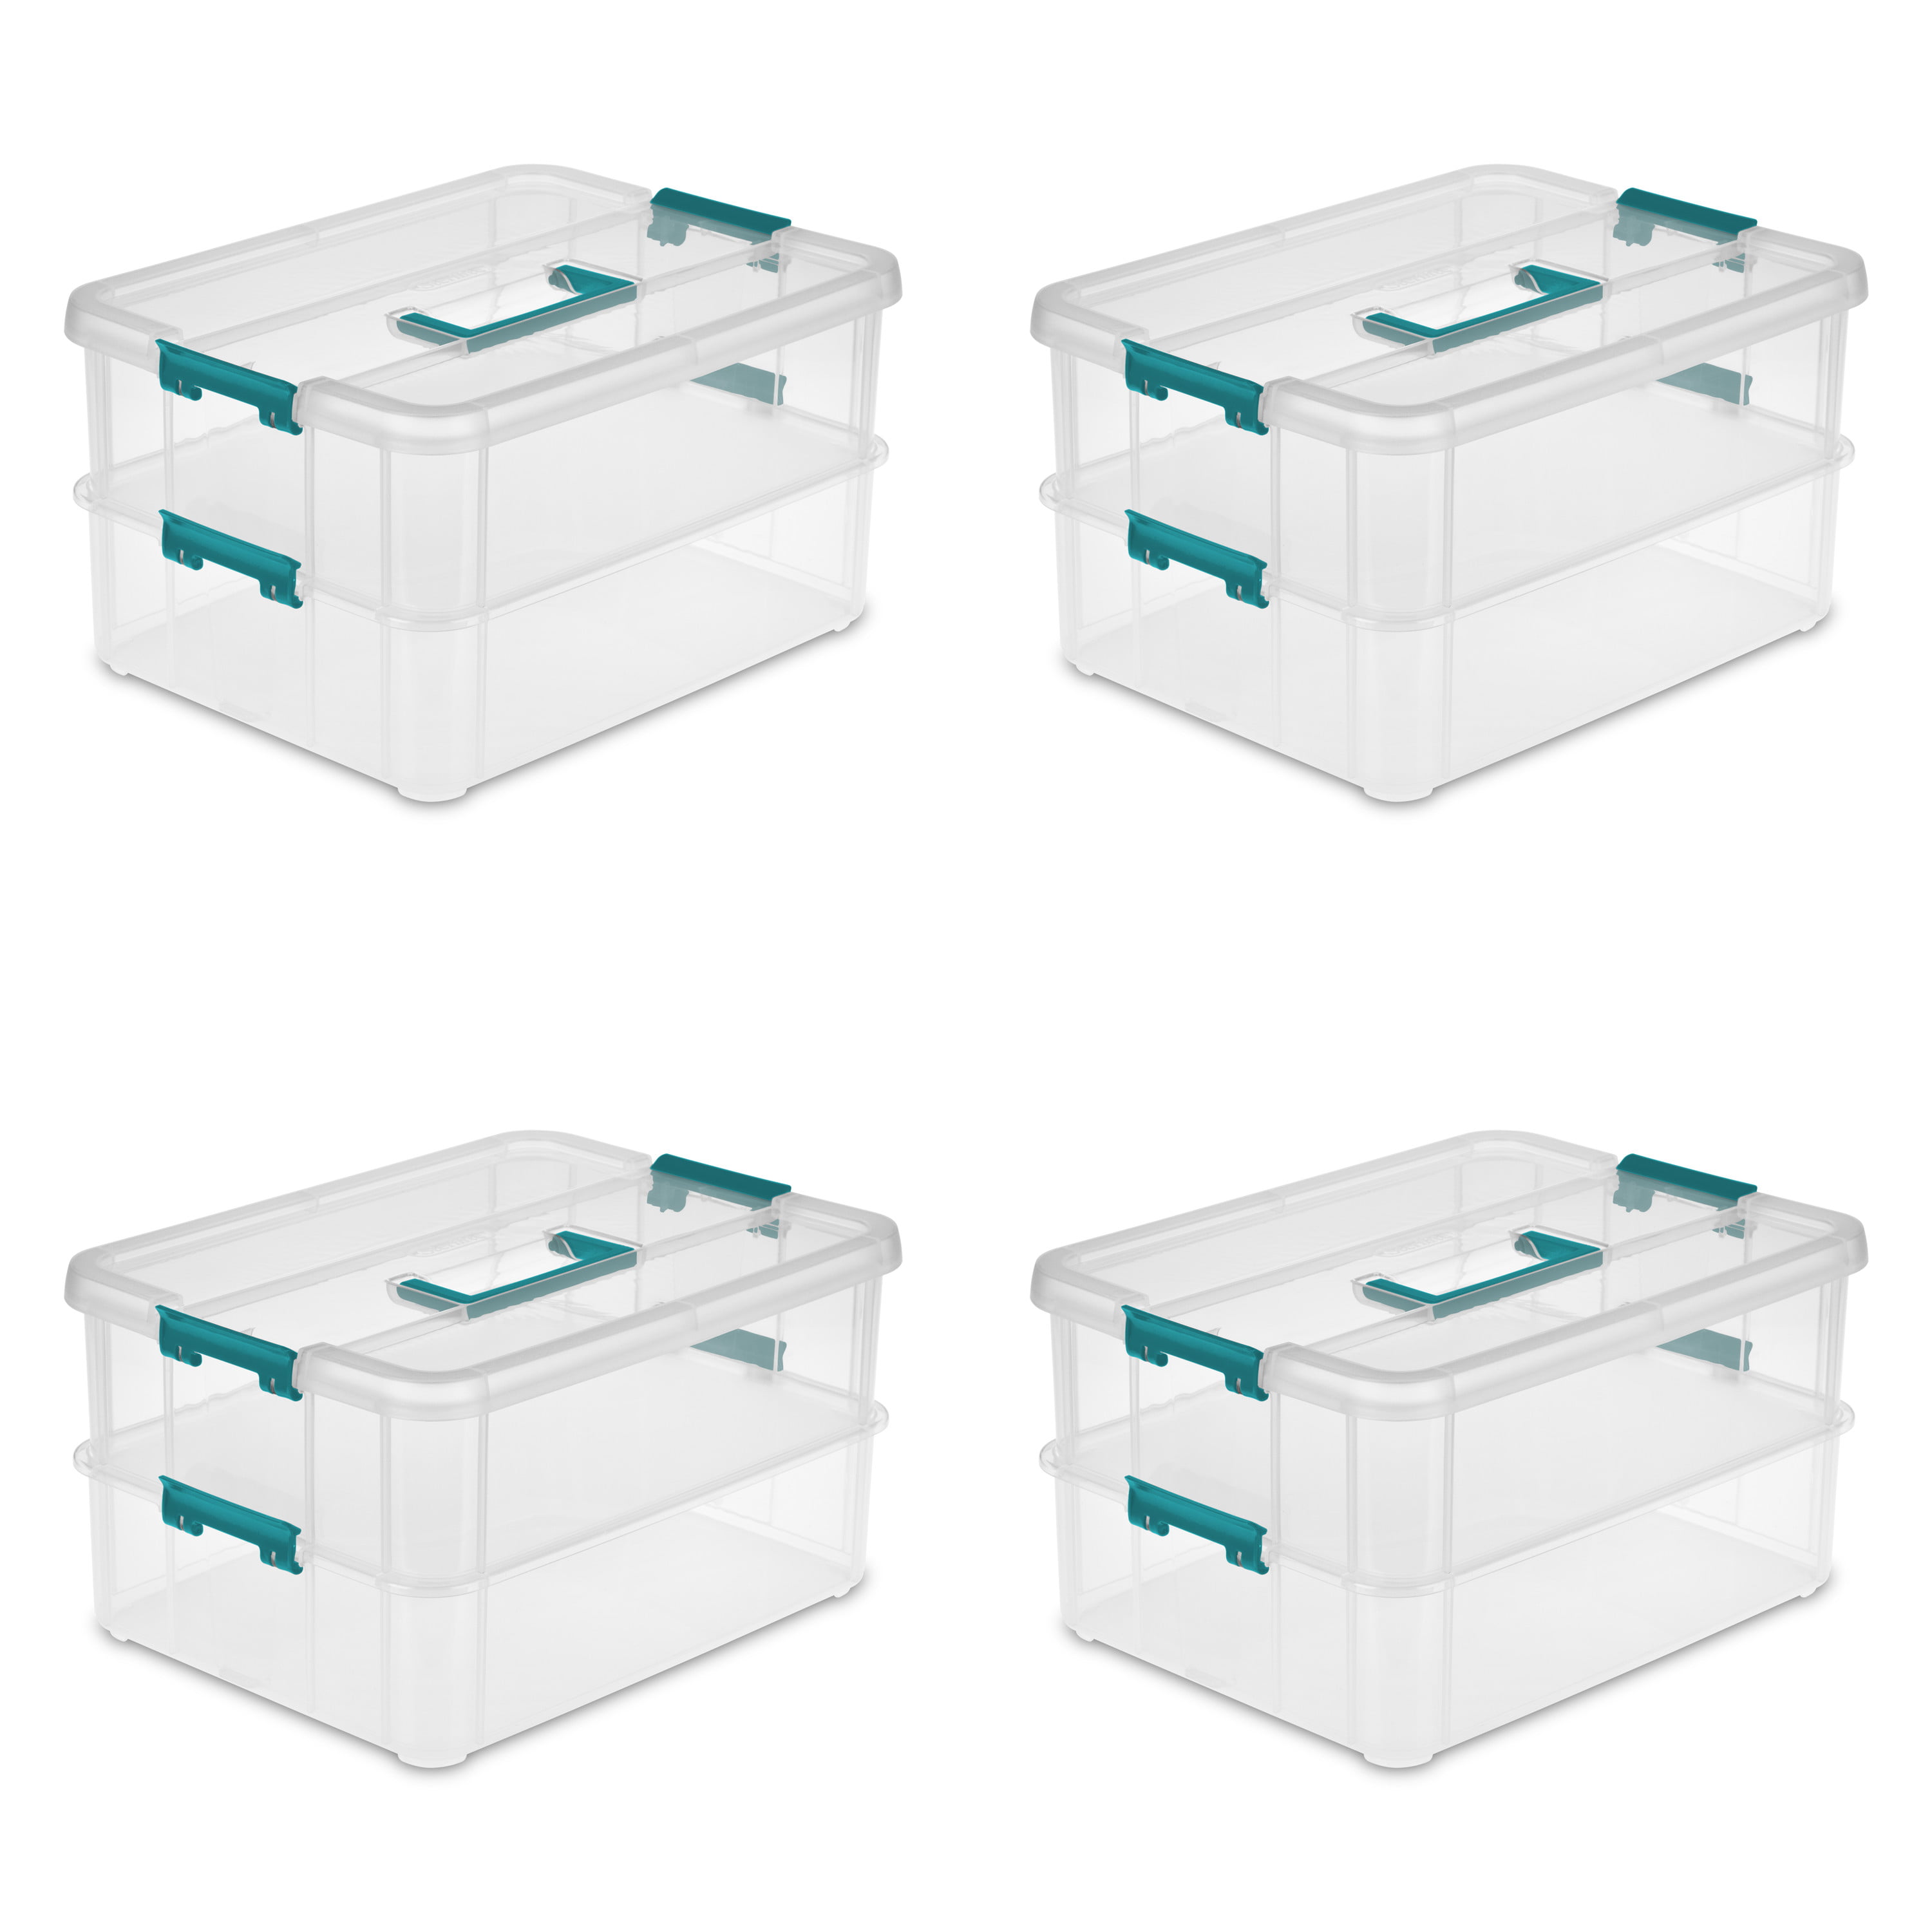 Sterilite Stack & Carry 2 Layer Handle Box Teal Sachet Case of 4 